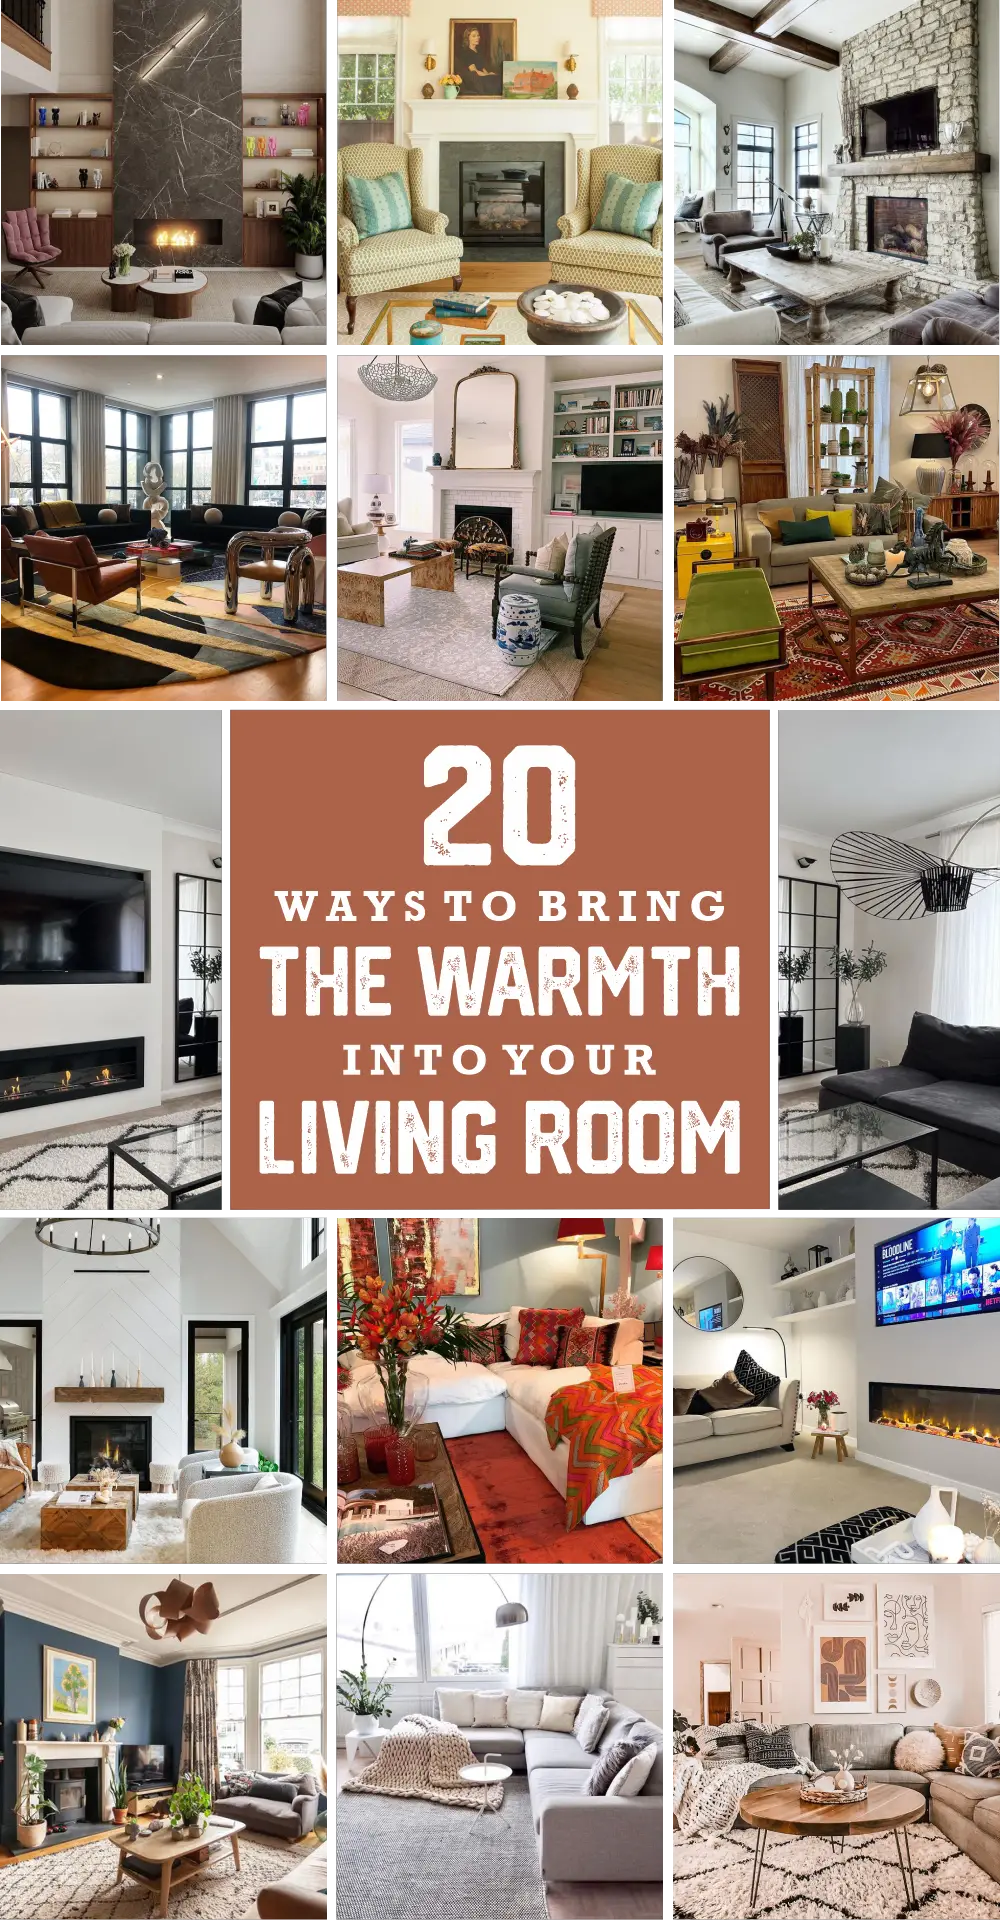 20 Ways to Bring the Warmth into Your Living Room - Talkdecor